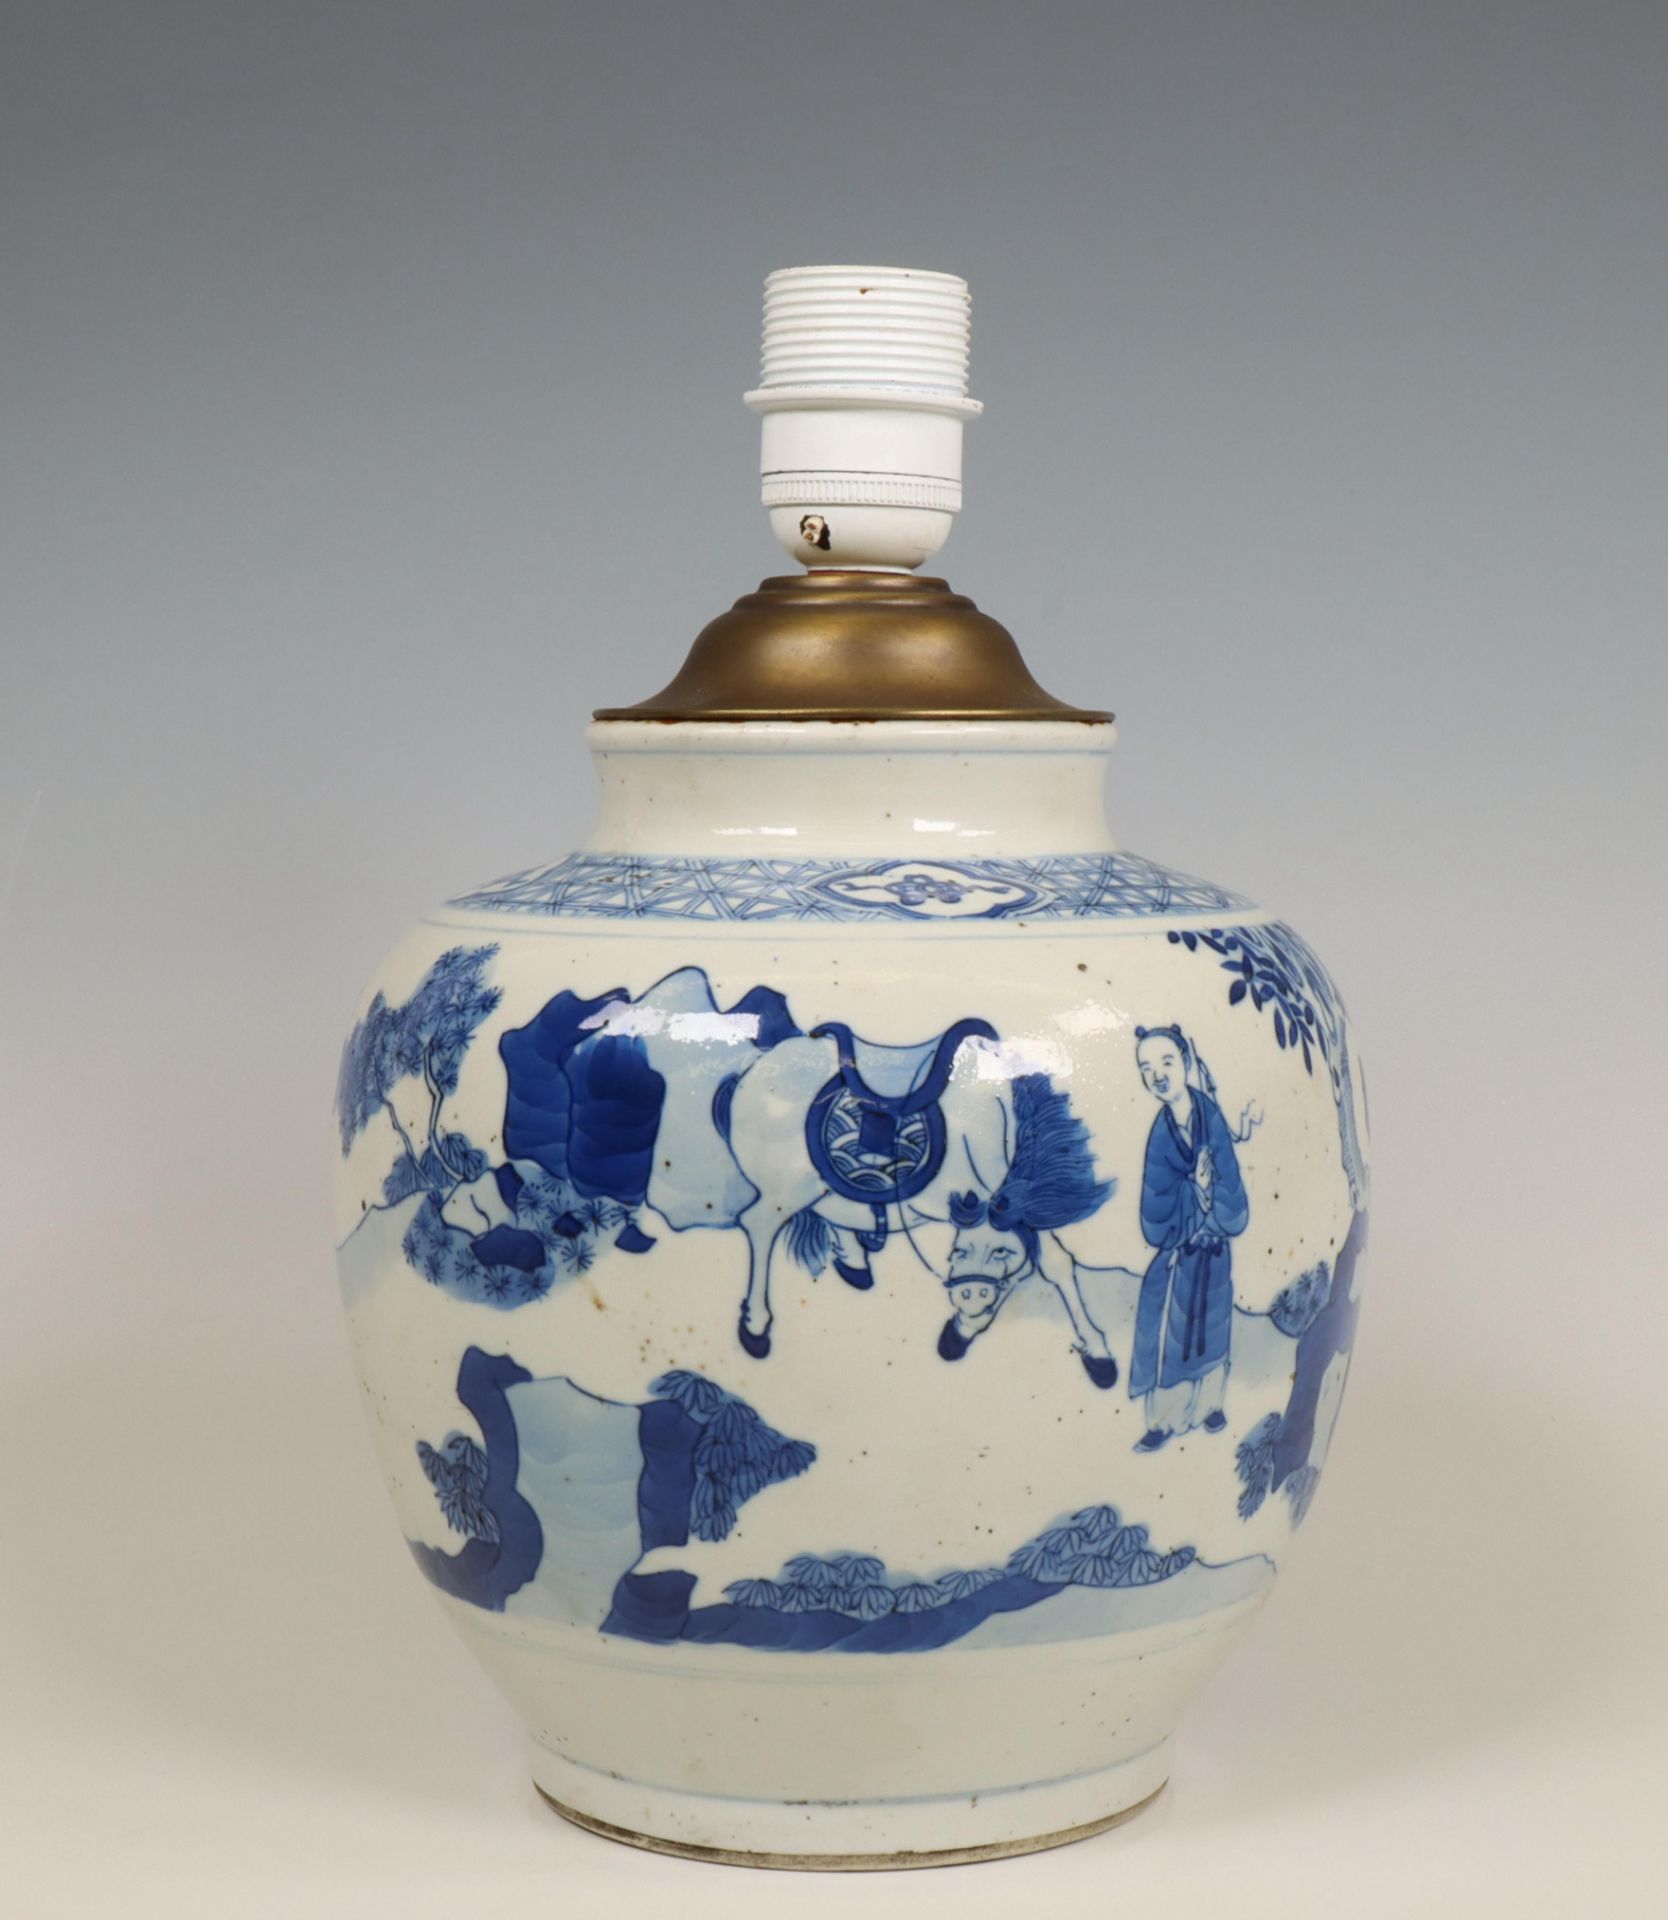 China, blue and white porcelain vase mounted as a lamp, 19th century, - Image 2 of 4